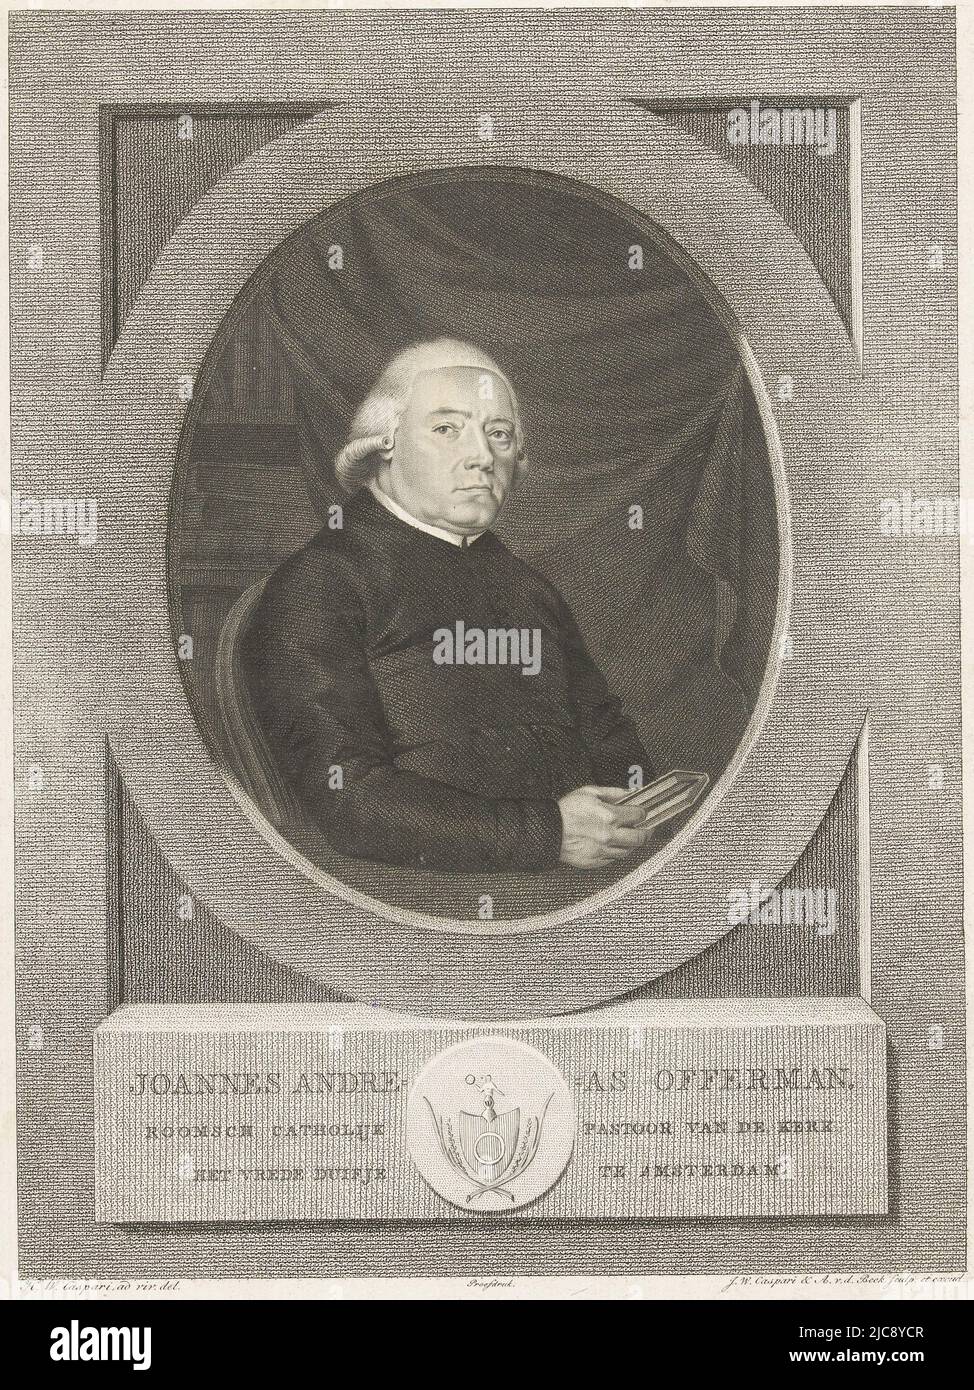 Portrait in oval frame of Jos Andreas Offerman, pastor of the Amsterdam church of St. Willibrordus Binnen de Veste. Bust to the right. Offerman wears a cassock with a white priest's collar. He holds a book in his right hand. In the background a bookcase. The print has a Dutch caption with the name of the person portrayed and a cartouche containing the image of a dove. Portrait of Jos Andreas Offerman, print maker: Jan Willem Caspari, (mentioned on object), print maker: Antonie van der Beek, (mentioned on object), intermediary draughtsman: Hendrik Willem Caspari, (mentioned on object Stock Photo